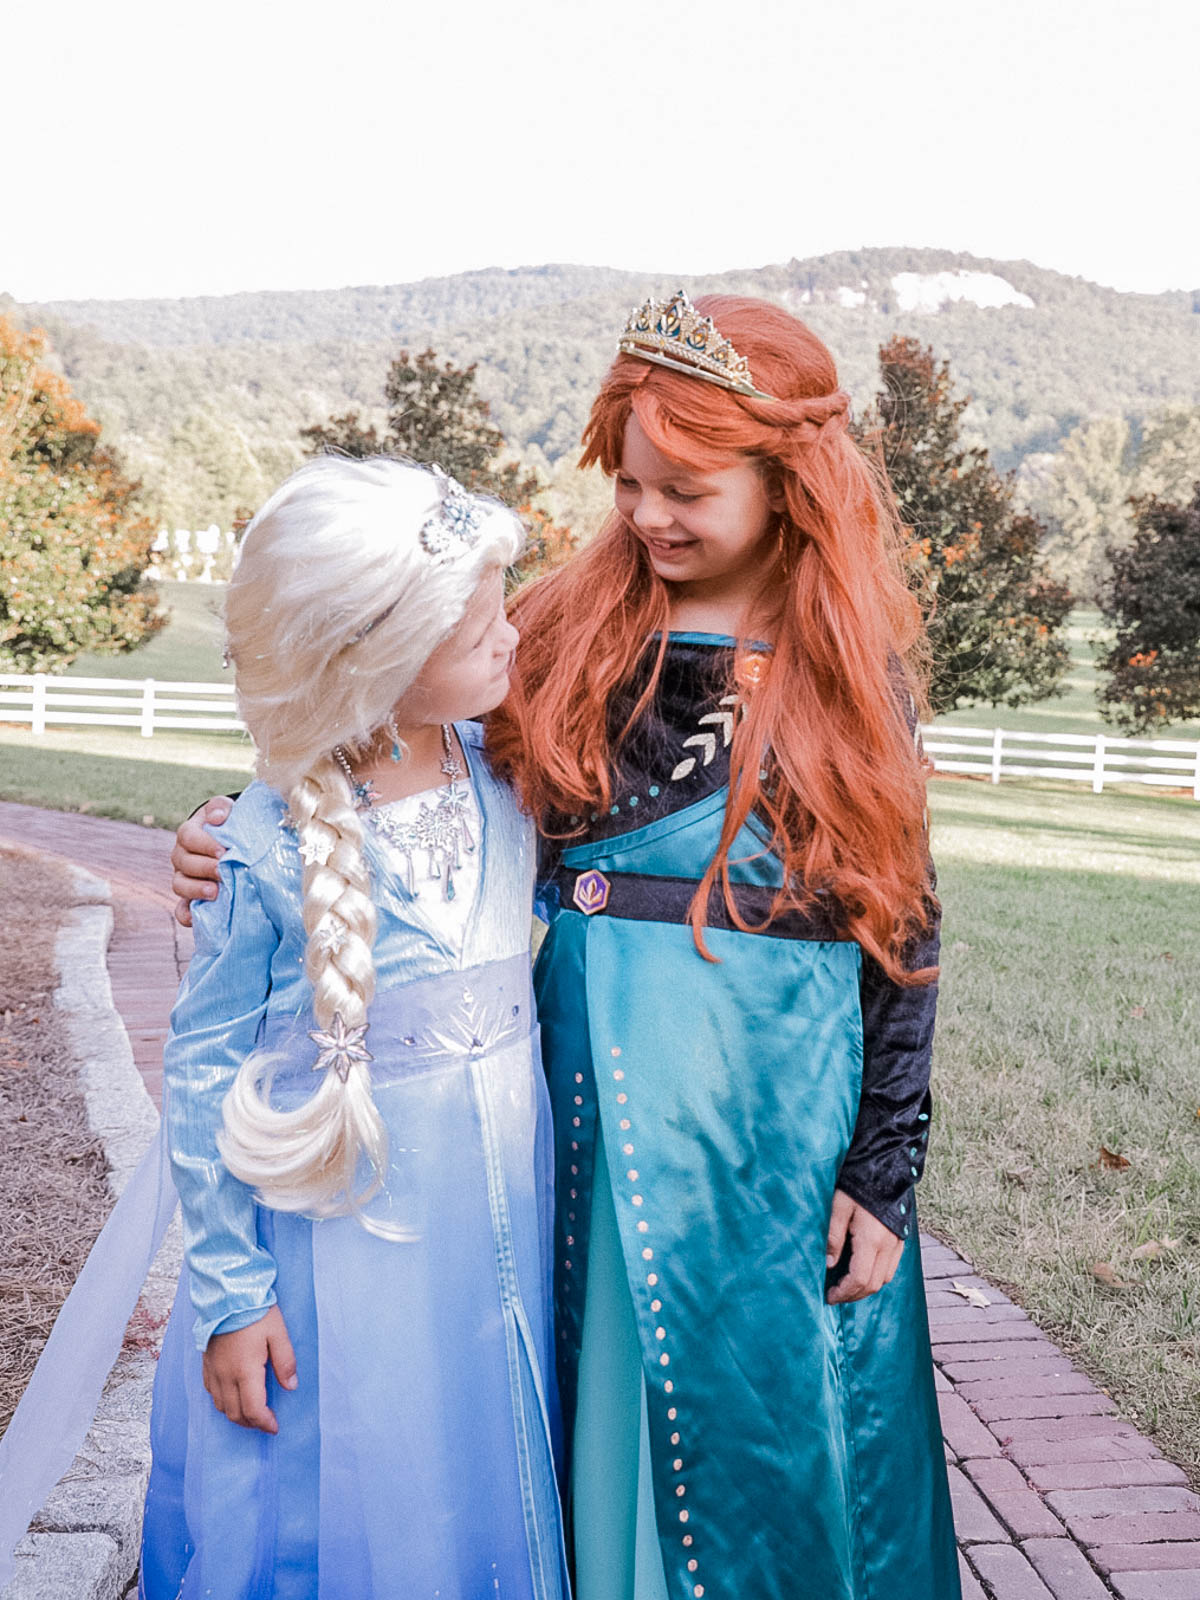 Disney princess costumes from Frozen 2. 